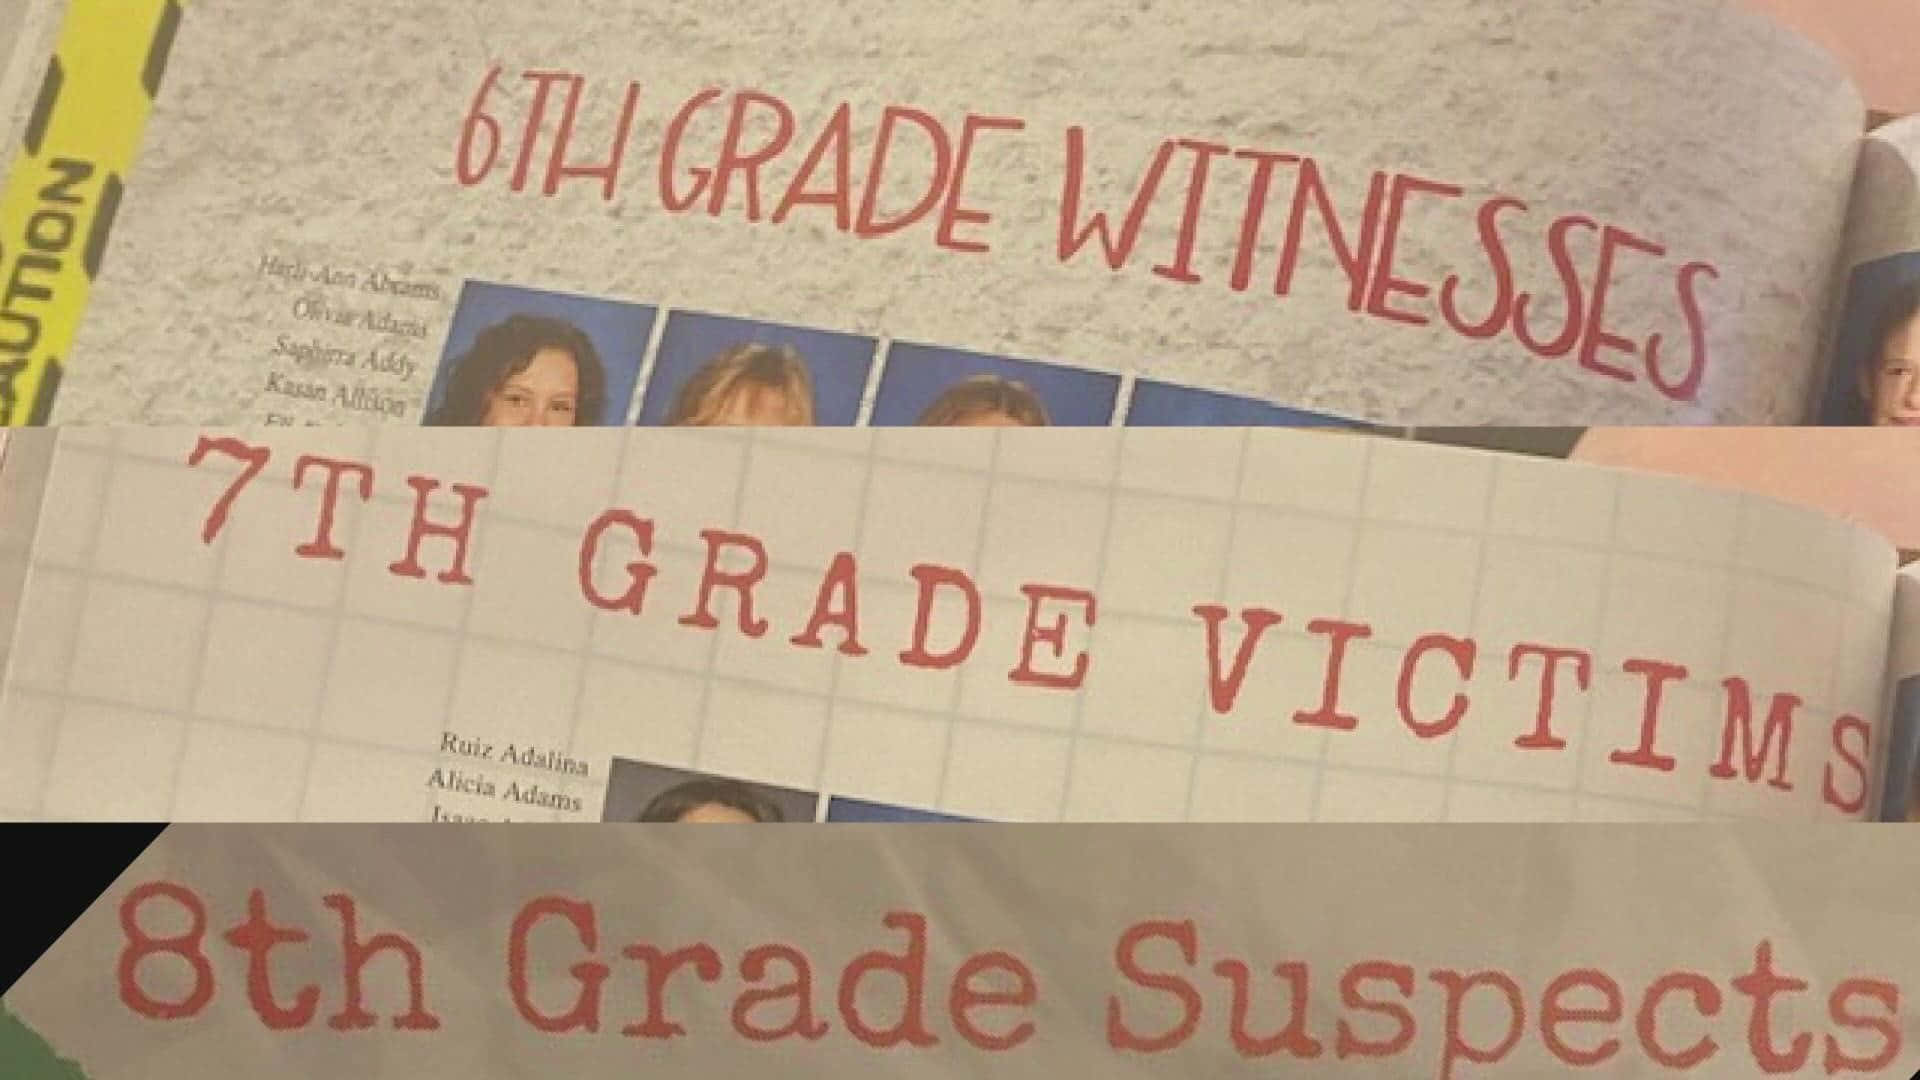 A Book With The Words 7th Grade Witnesses